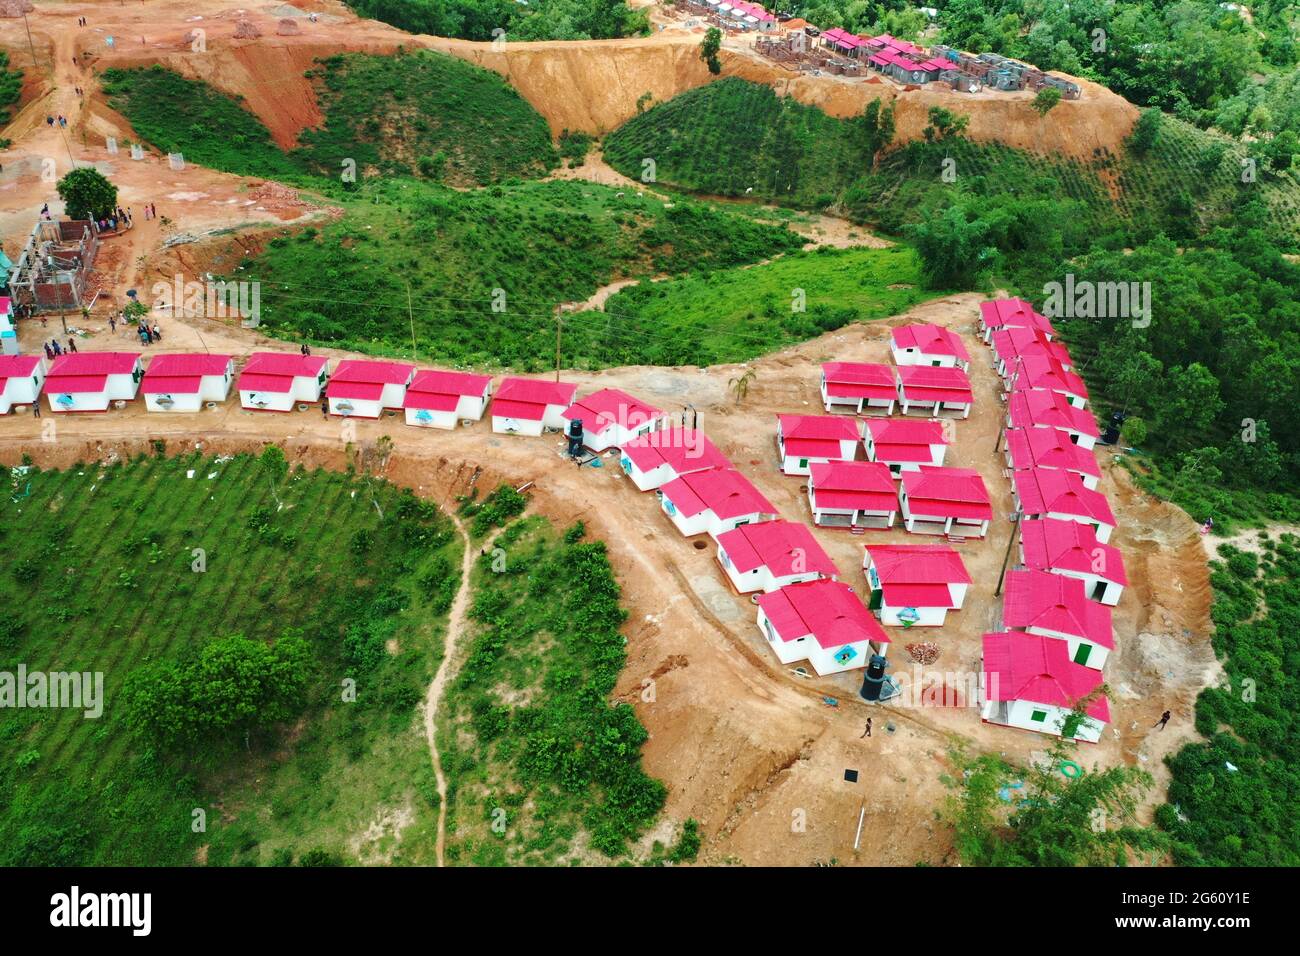 Moulvibazar, Bangladesh - June 20, 2021:  A bird’s eye view of the shelter project for homeless people at Sreemangal in Moulvibazar, Bangladesh. Stock Photo